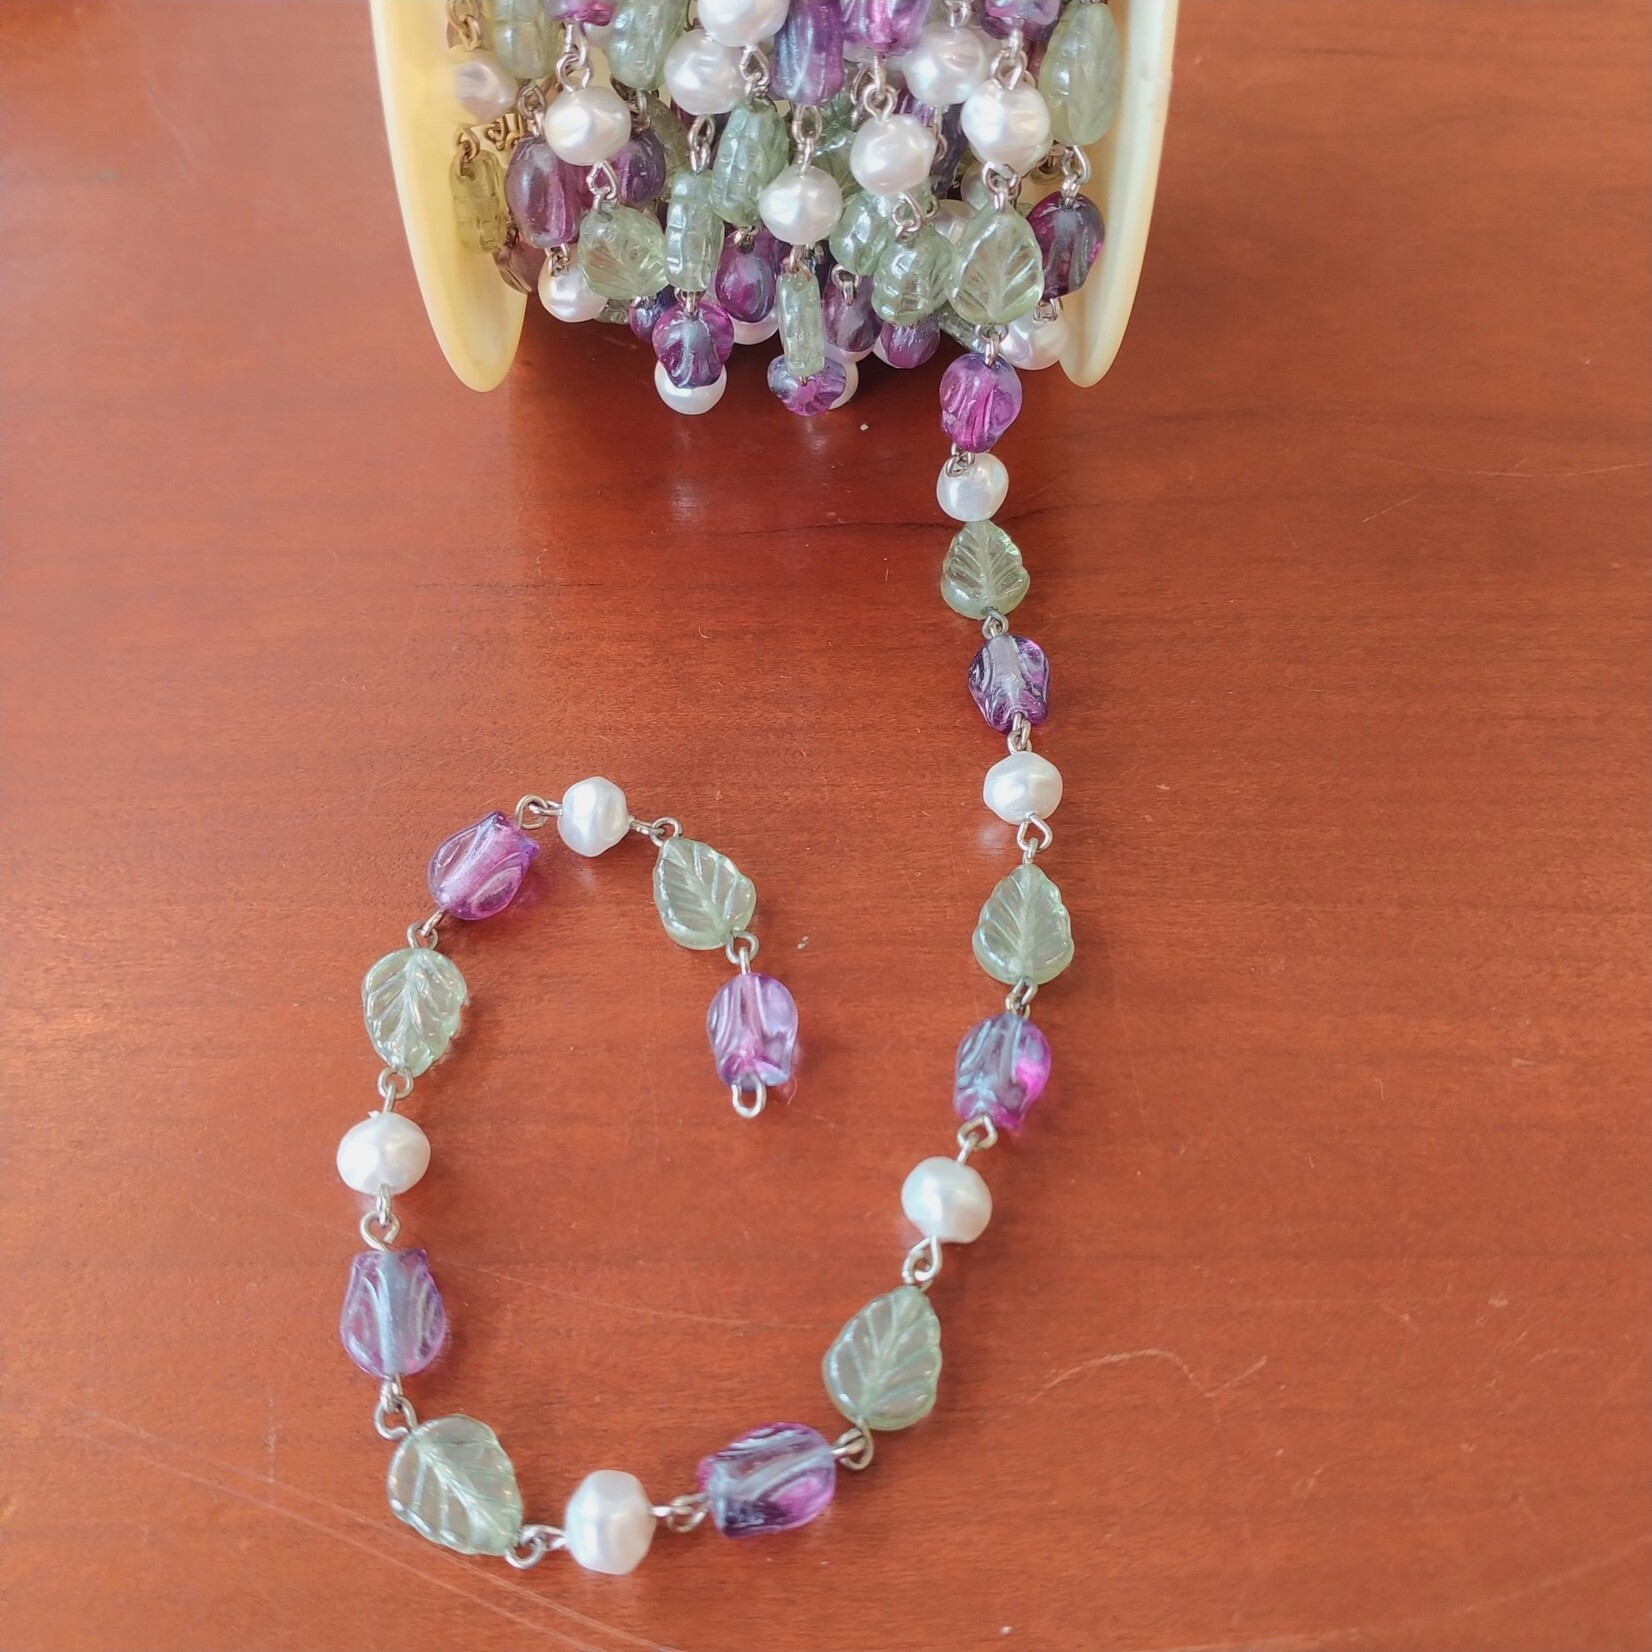 Czech Glass Beaded Chain Purple Tulips w/ Leaves and Pearls - 1 foot